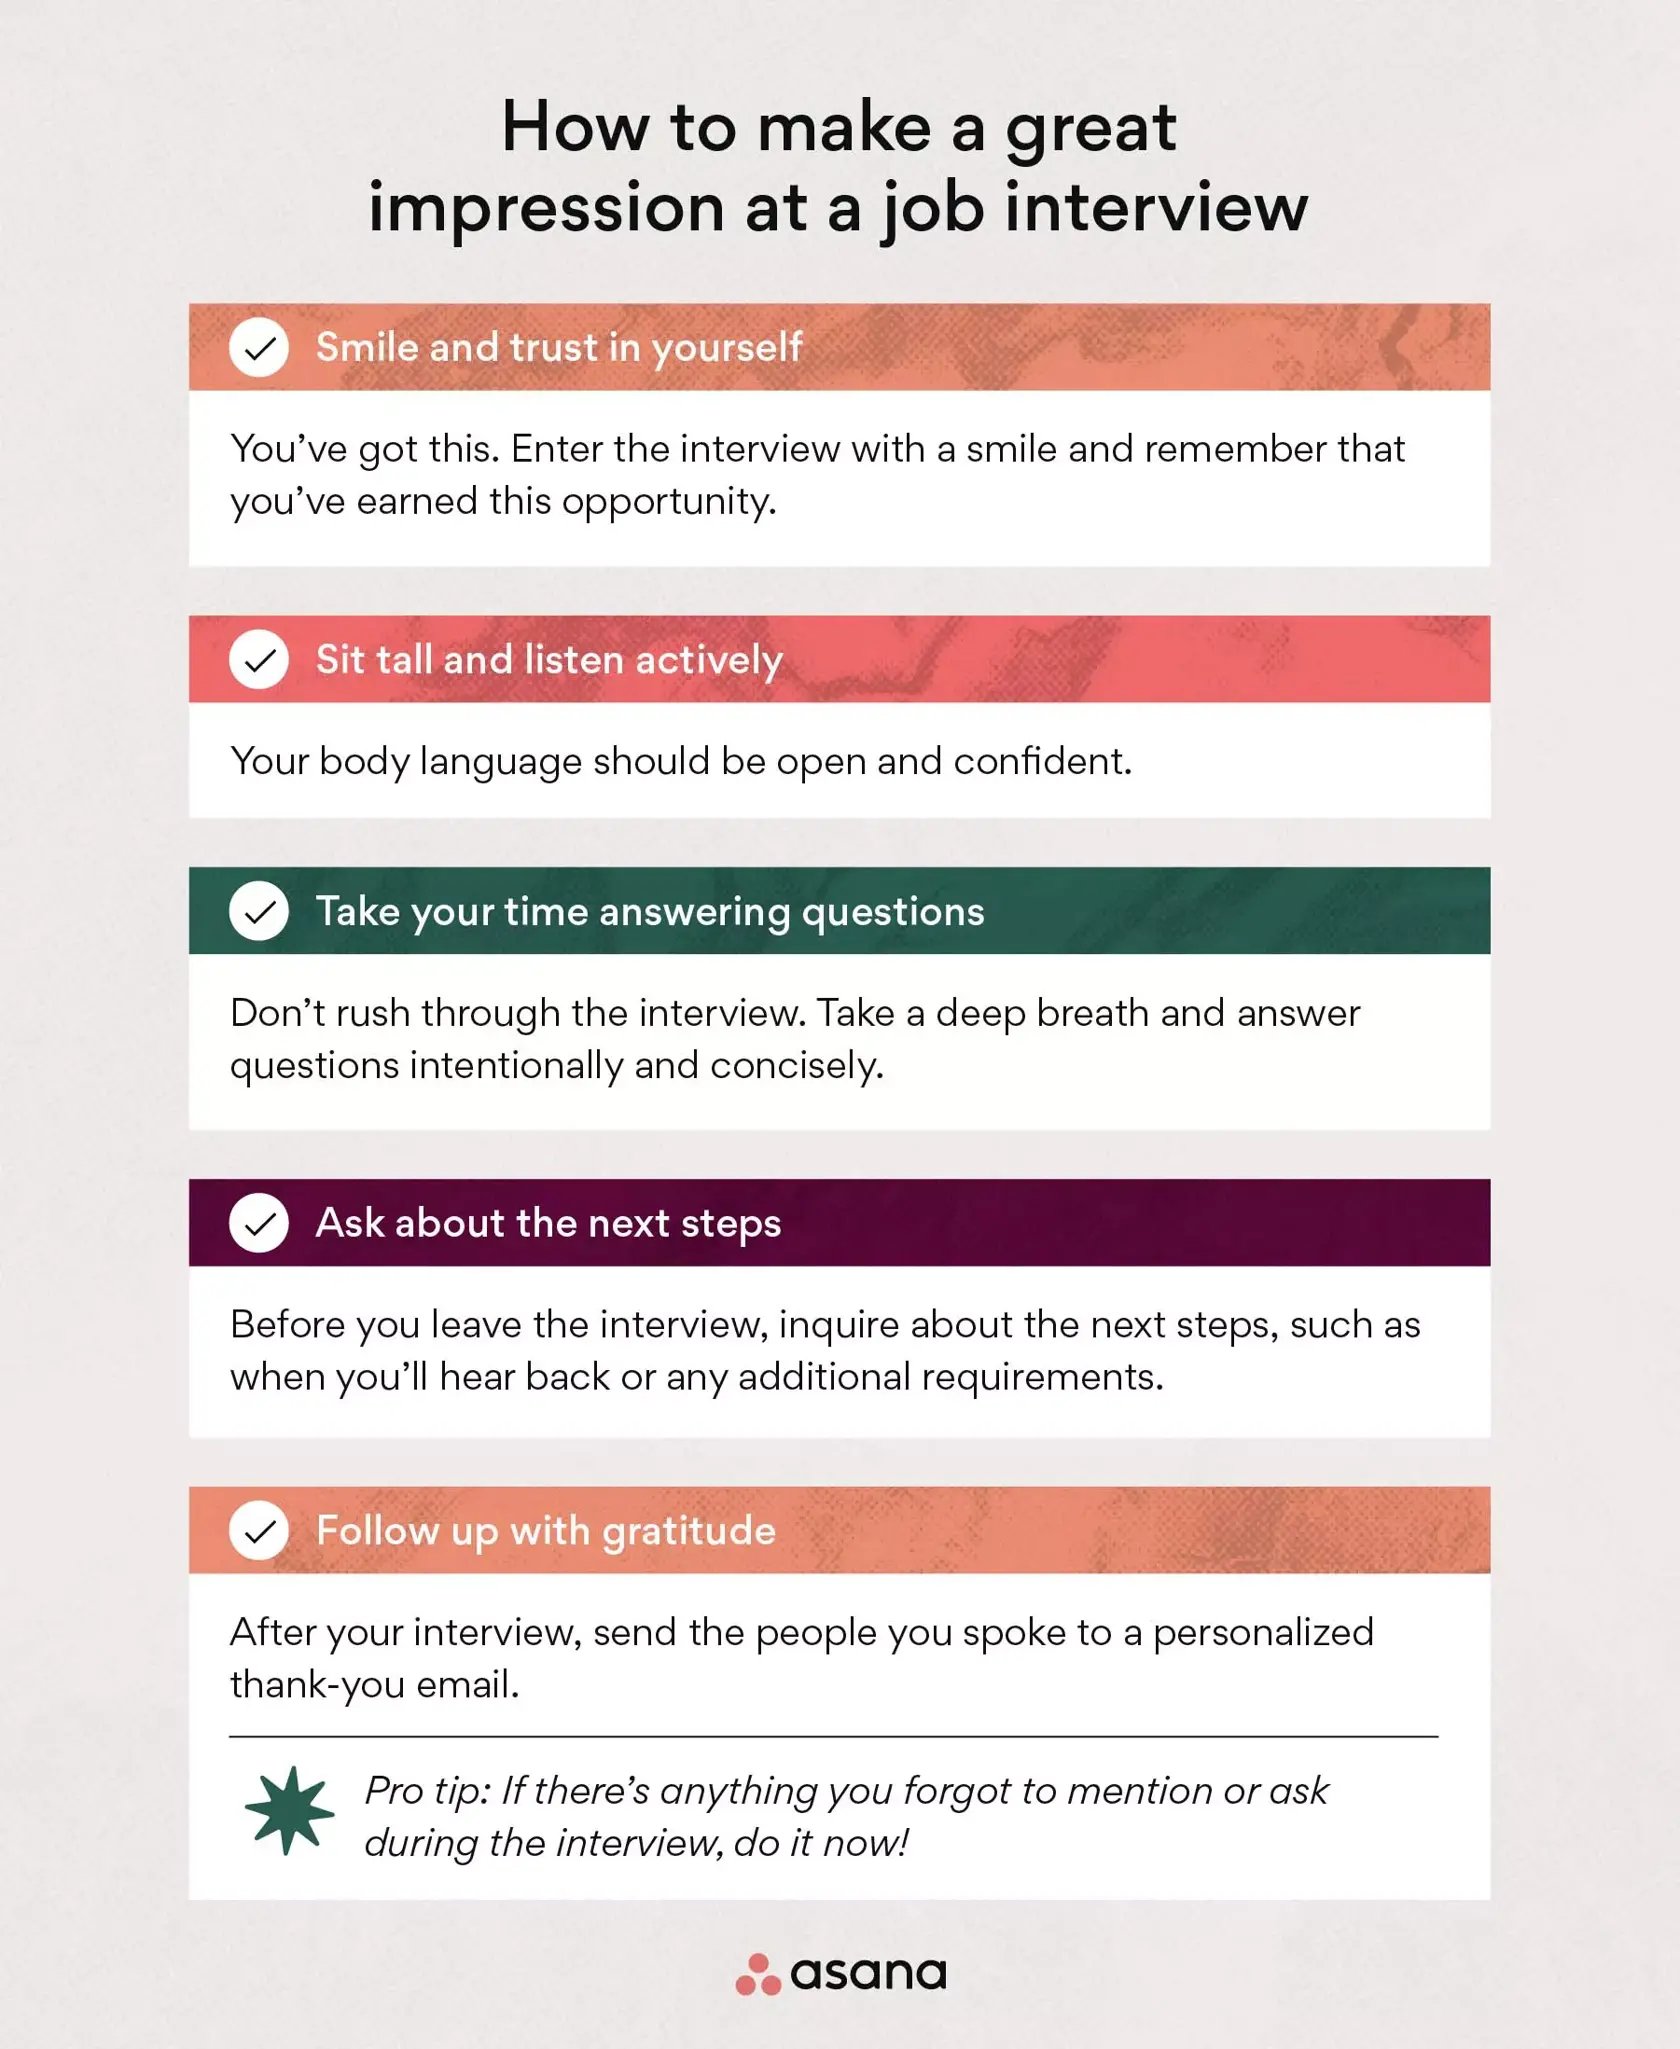 [inline illustration] how to make a great impression at a job interview (infographic)